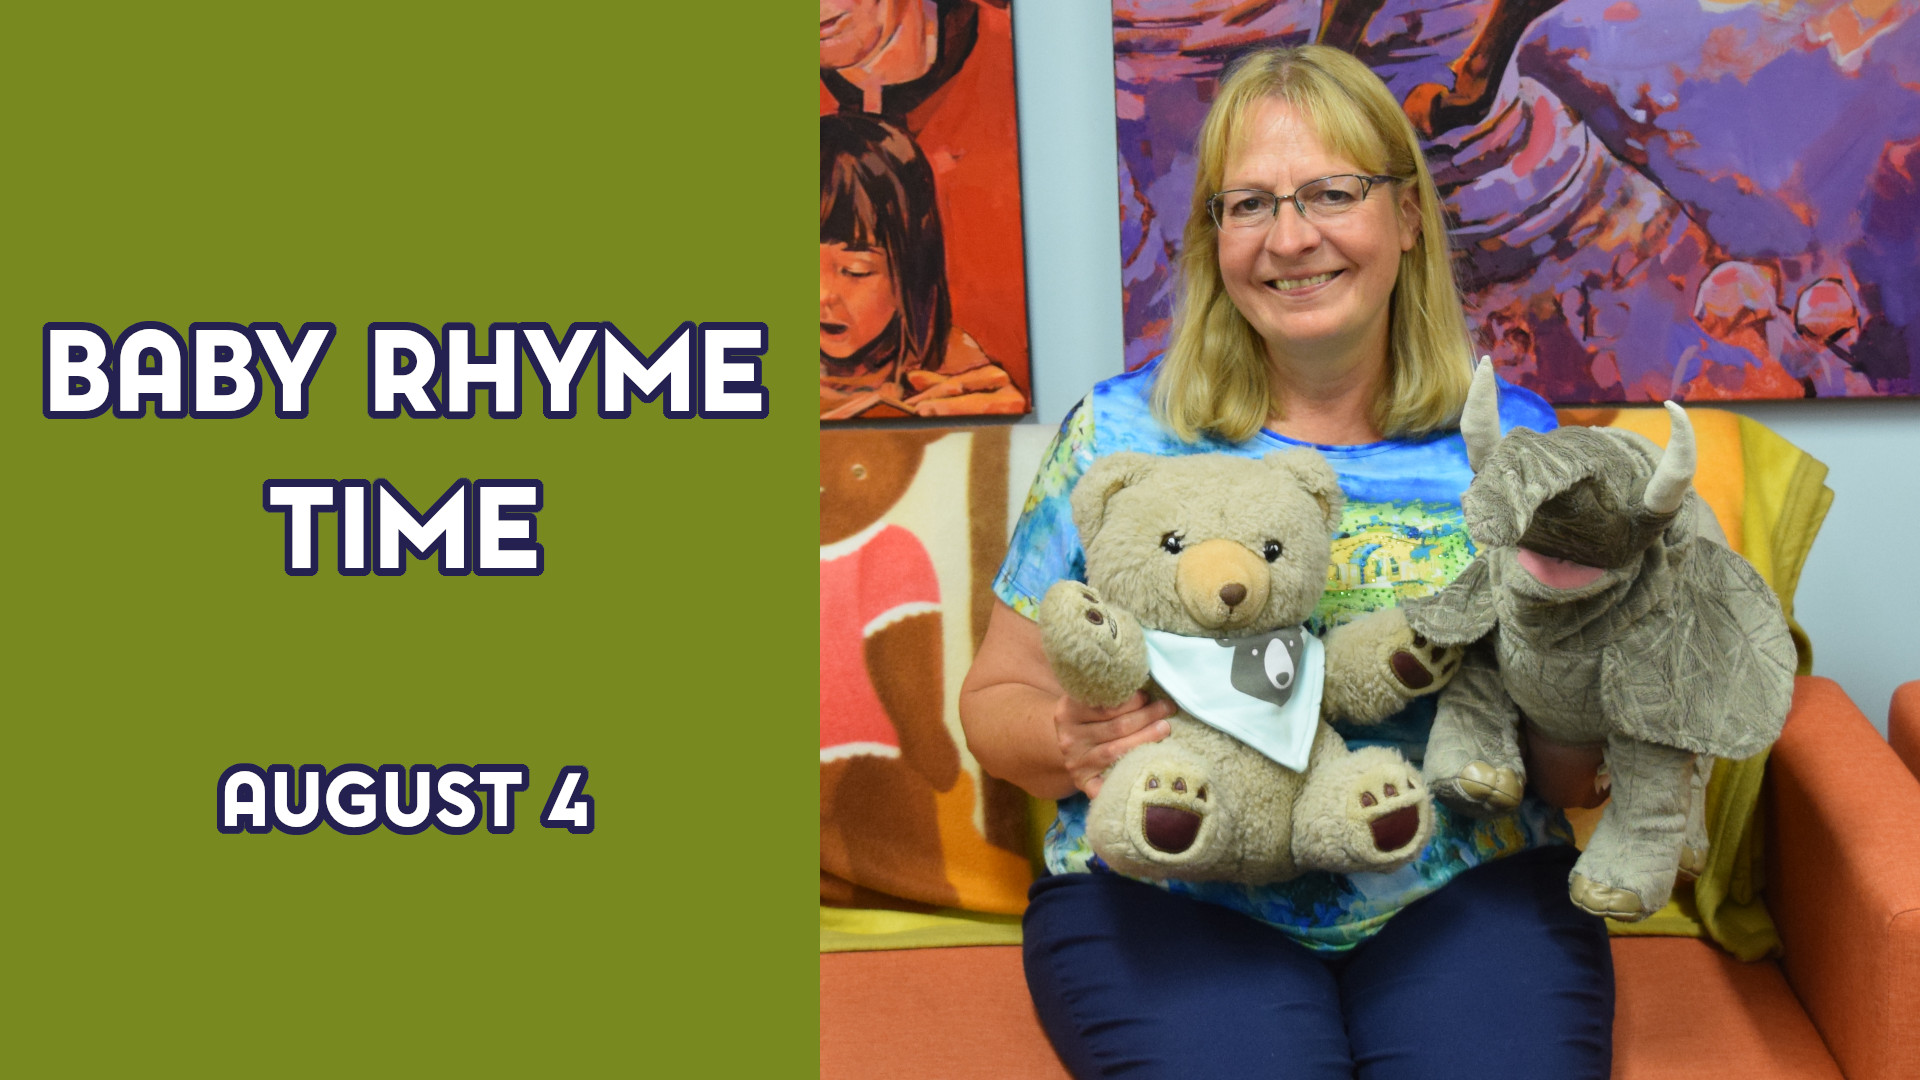 A woman holds stuffed animals next to the text "Baby Rhyme Time August 4"